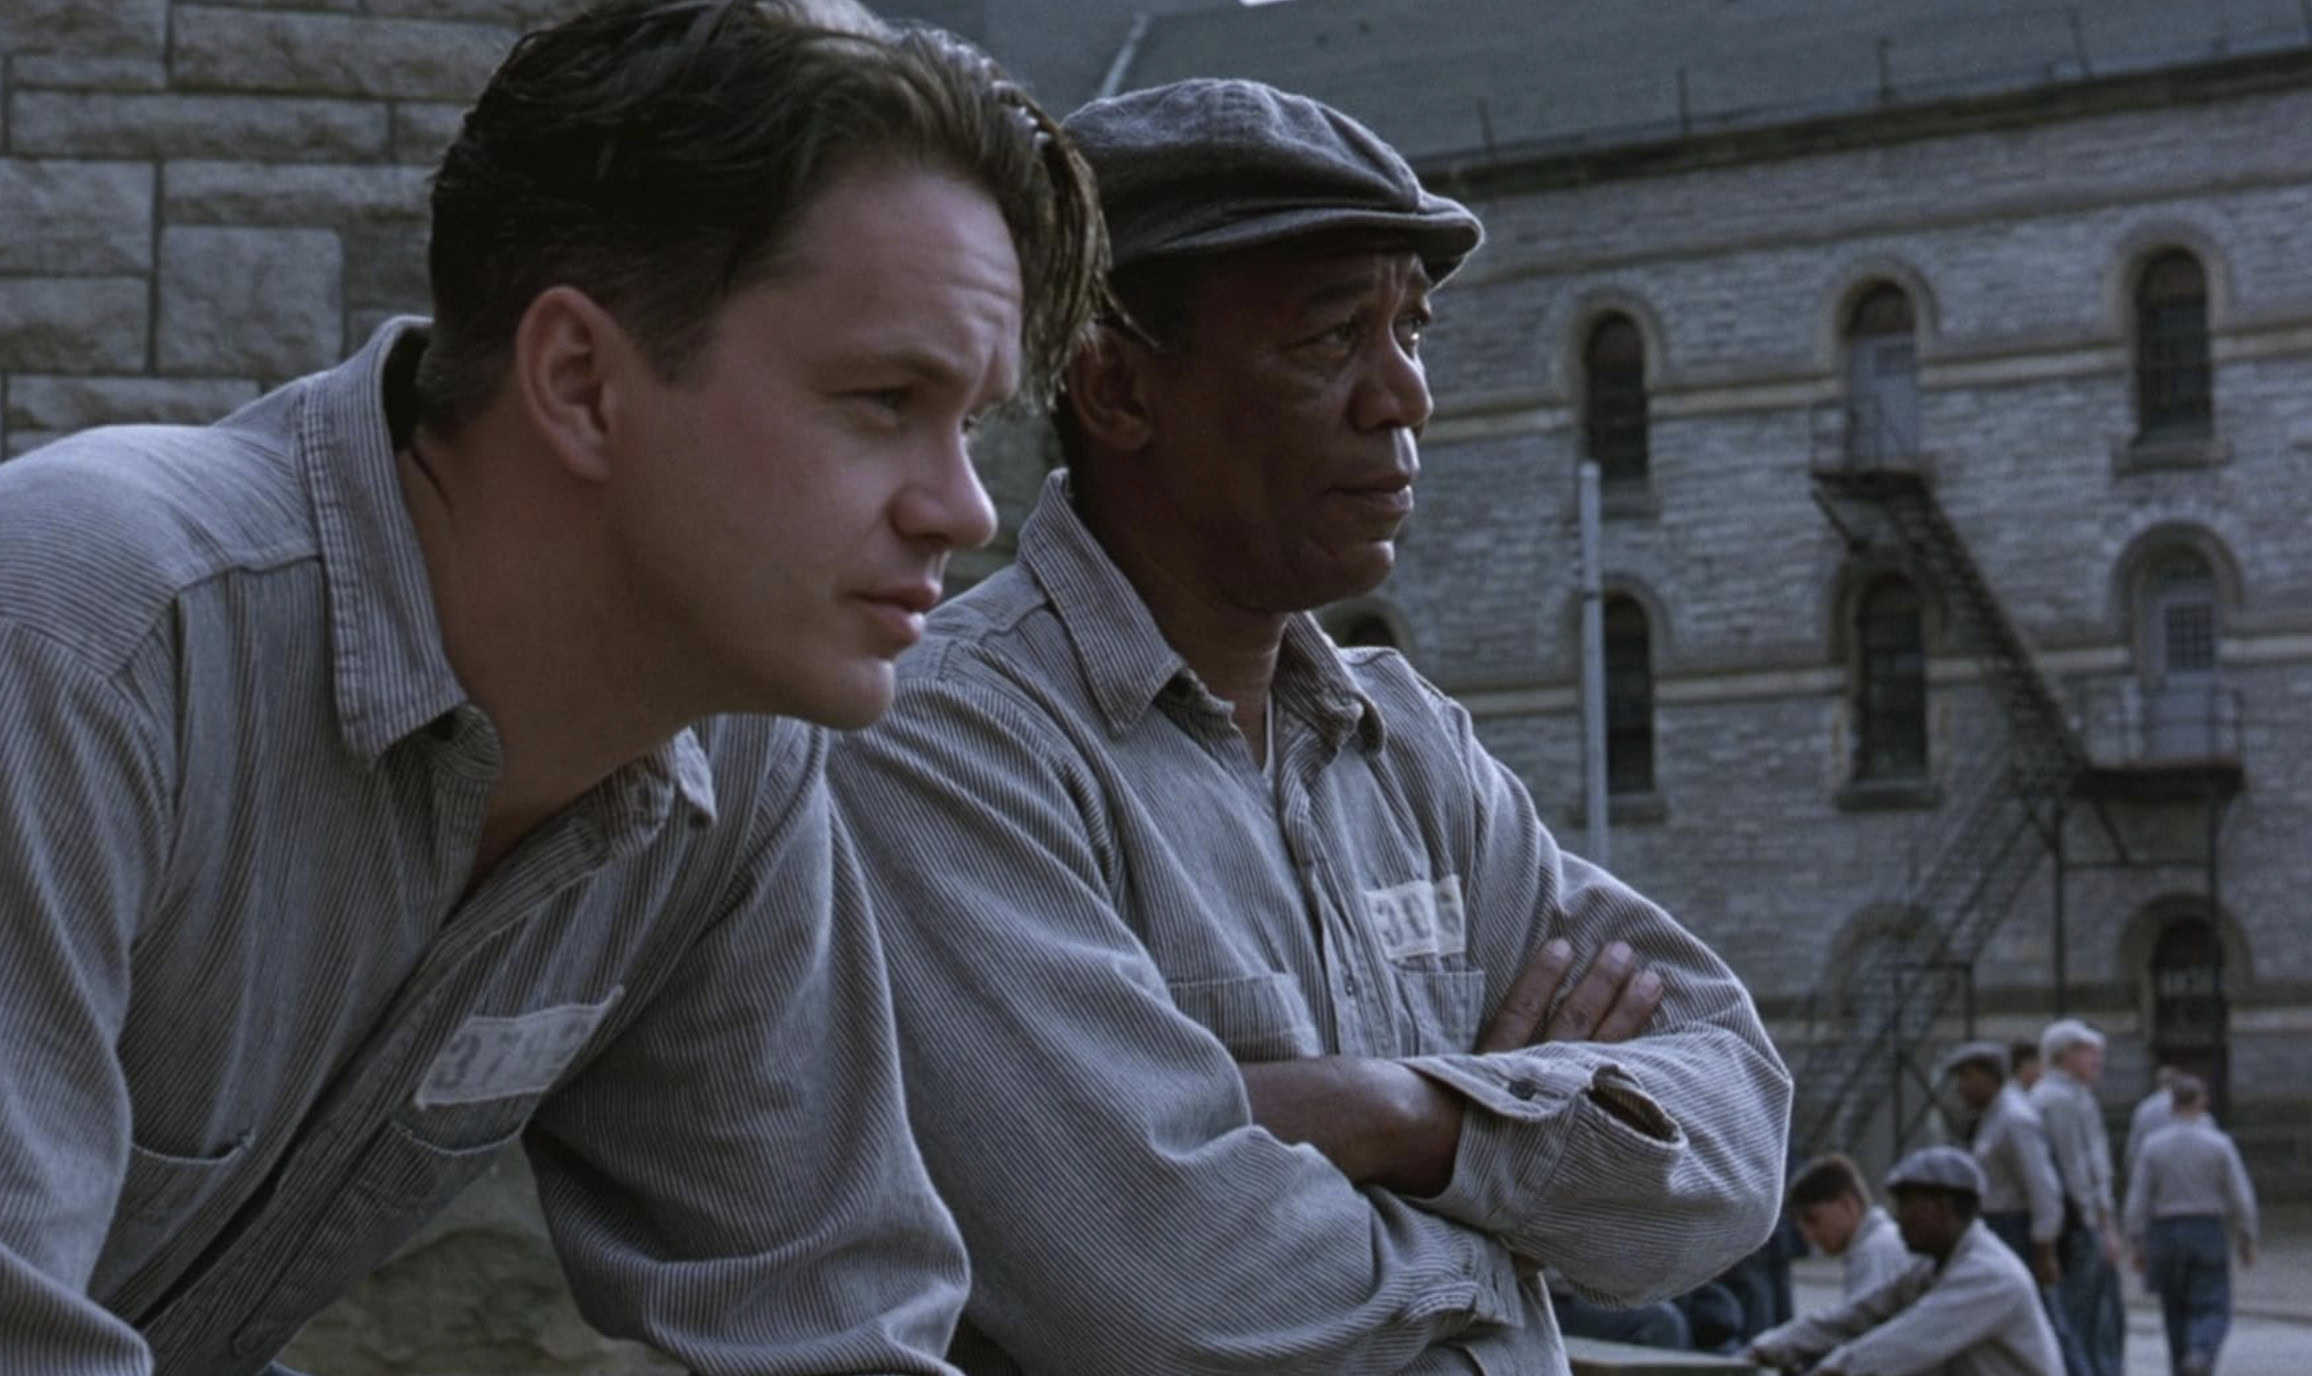 <p>Another one of the greatest speeches in movie history comes from "The Shawshank Redemption." In the film, Andy Dufresne passes the time in prison learning how to get along and come away without losing his life. Along the way, he befriends Red, a long-time prisoner with enough wisdom to go around. In a quiet moment before the film's climax, the pair sit on a rooftop and discuss what life might be like beyond the confines of the prison's walls.</p> <p>Not yet fully resigned to prison living, Dufresne fantasizes about what life could be like after he gets out. He details his plan to move to the Pacific coast of Mexico and open a small hotel, living a quiet life, unencumbered by the actions that put him in prison in the first place. Red, however, has been in prison so long that it is all he knows, and he fears what life would be like if given his freedom. Furthermore, he shoots down Dufresne's plans as pipe dreams. Besides giving us the iconic line "Get busy living or get busy dying" the speech captures the duality of experience, the irreconcilable yet inexorably linked state of hope and state of resignation.</p>